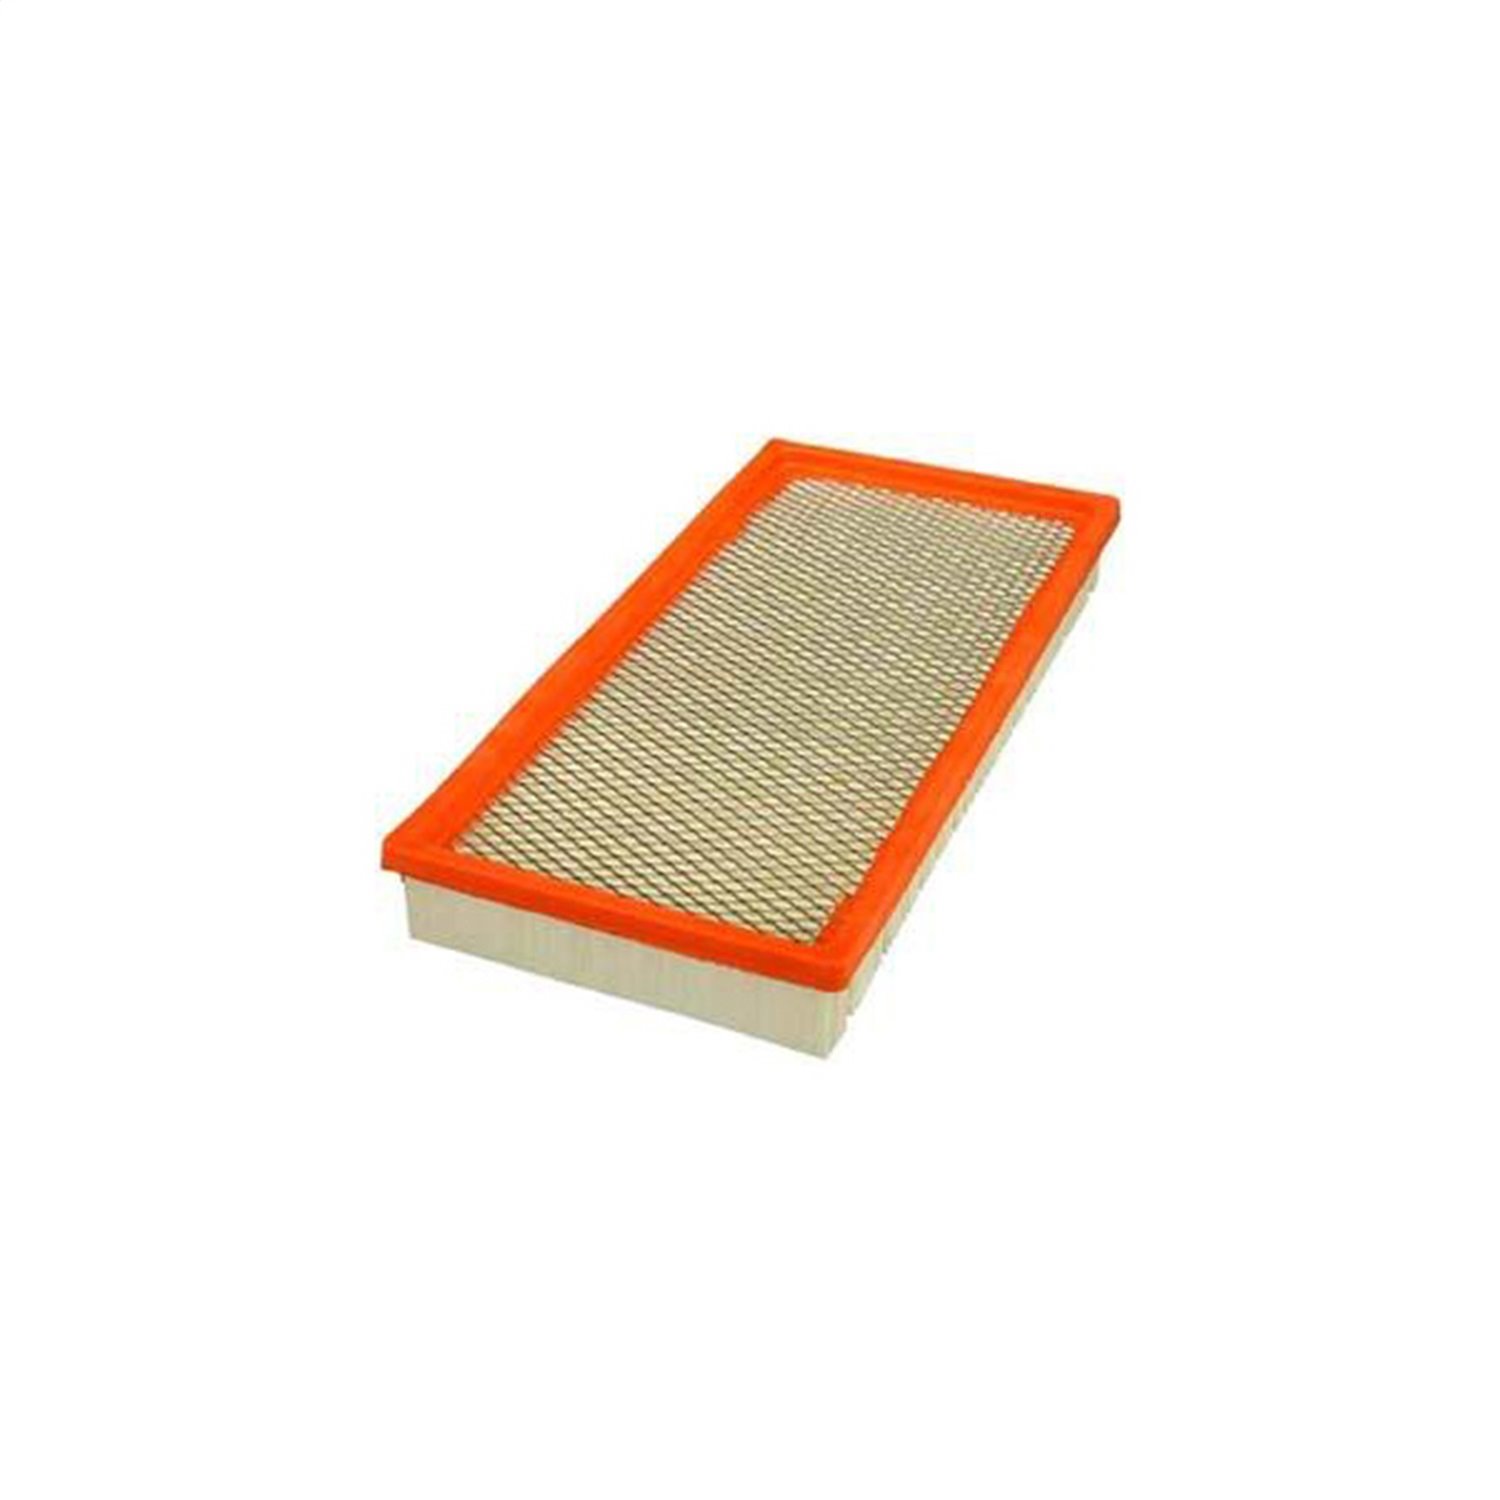 Replacement air filter from Omix-ADA, Fits 87-00 Jeep Cherokees with a 2.5L engine and 87-01 Cherokees with a 4.0L engine.